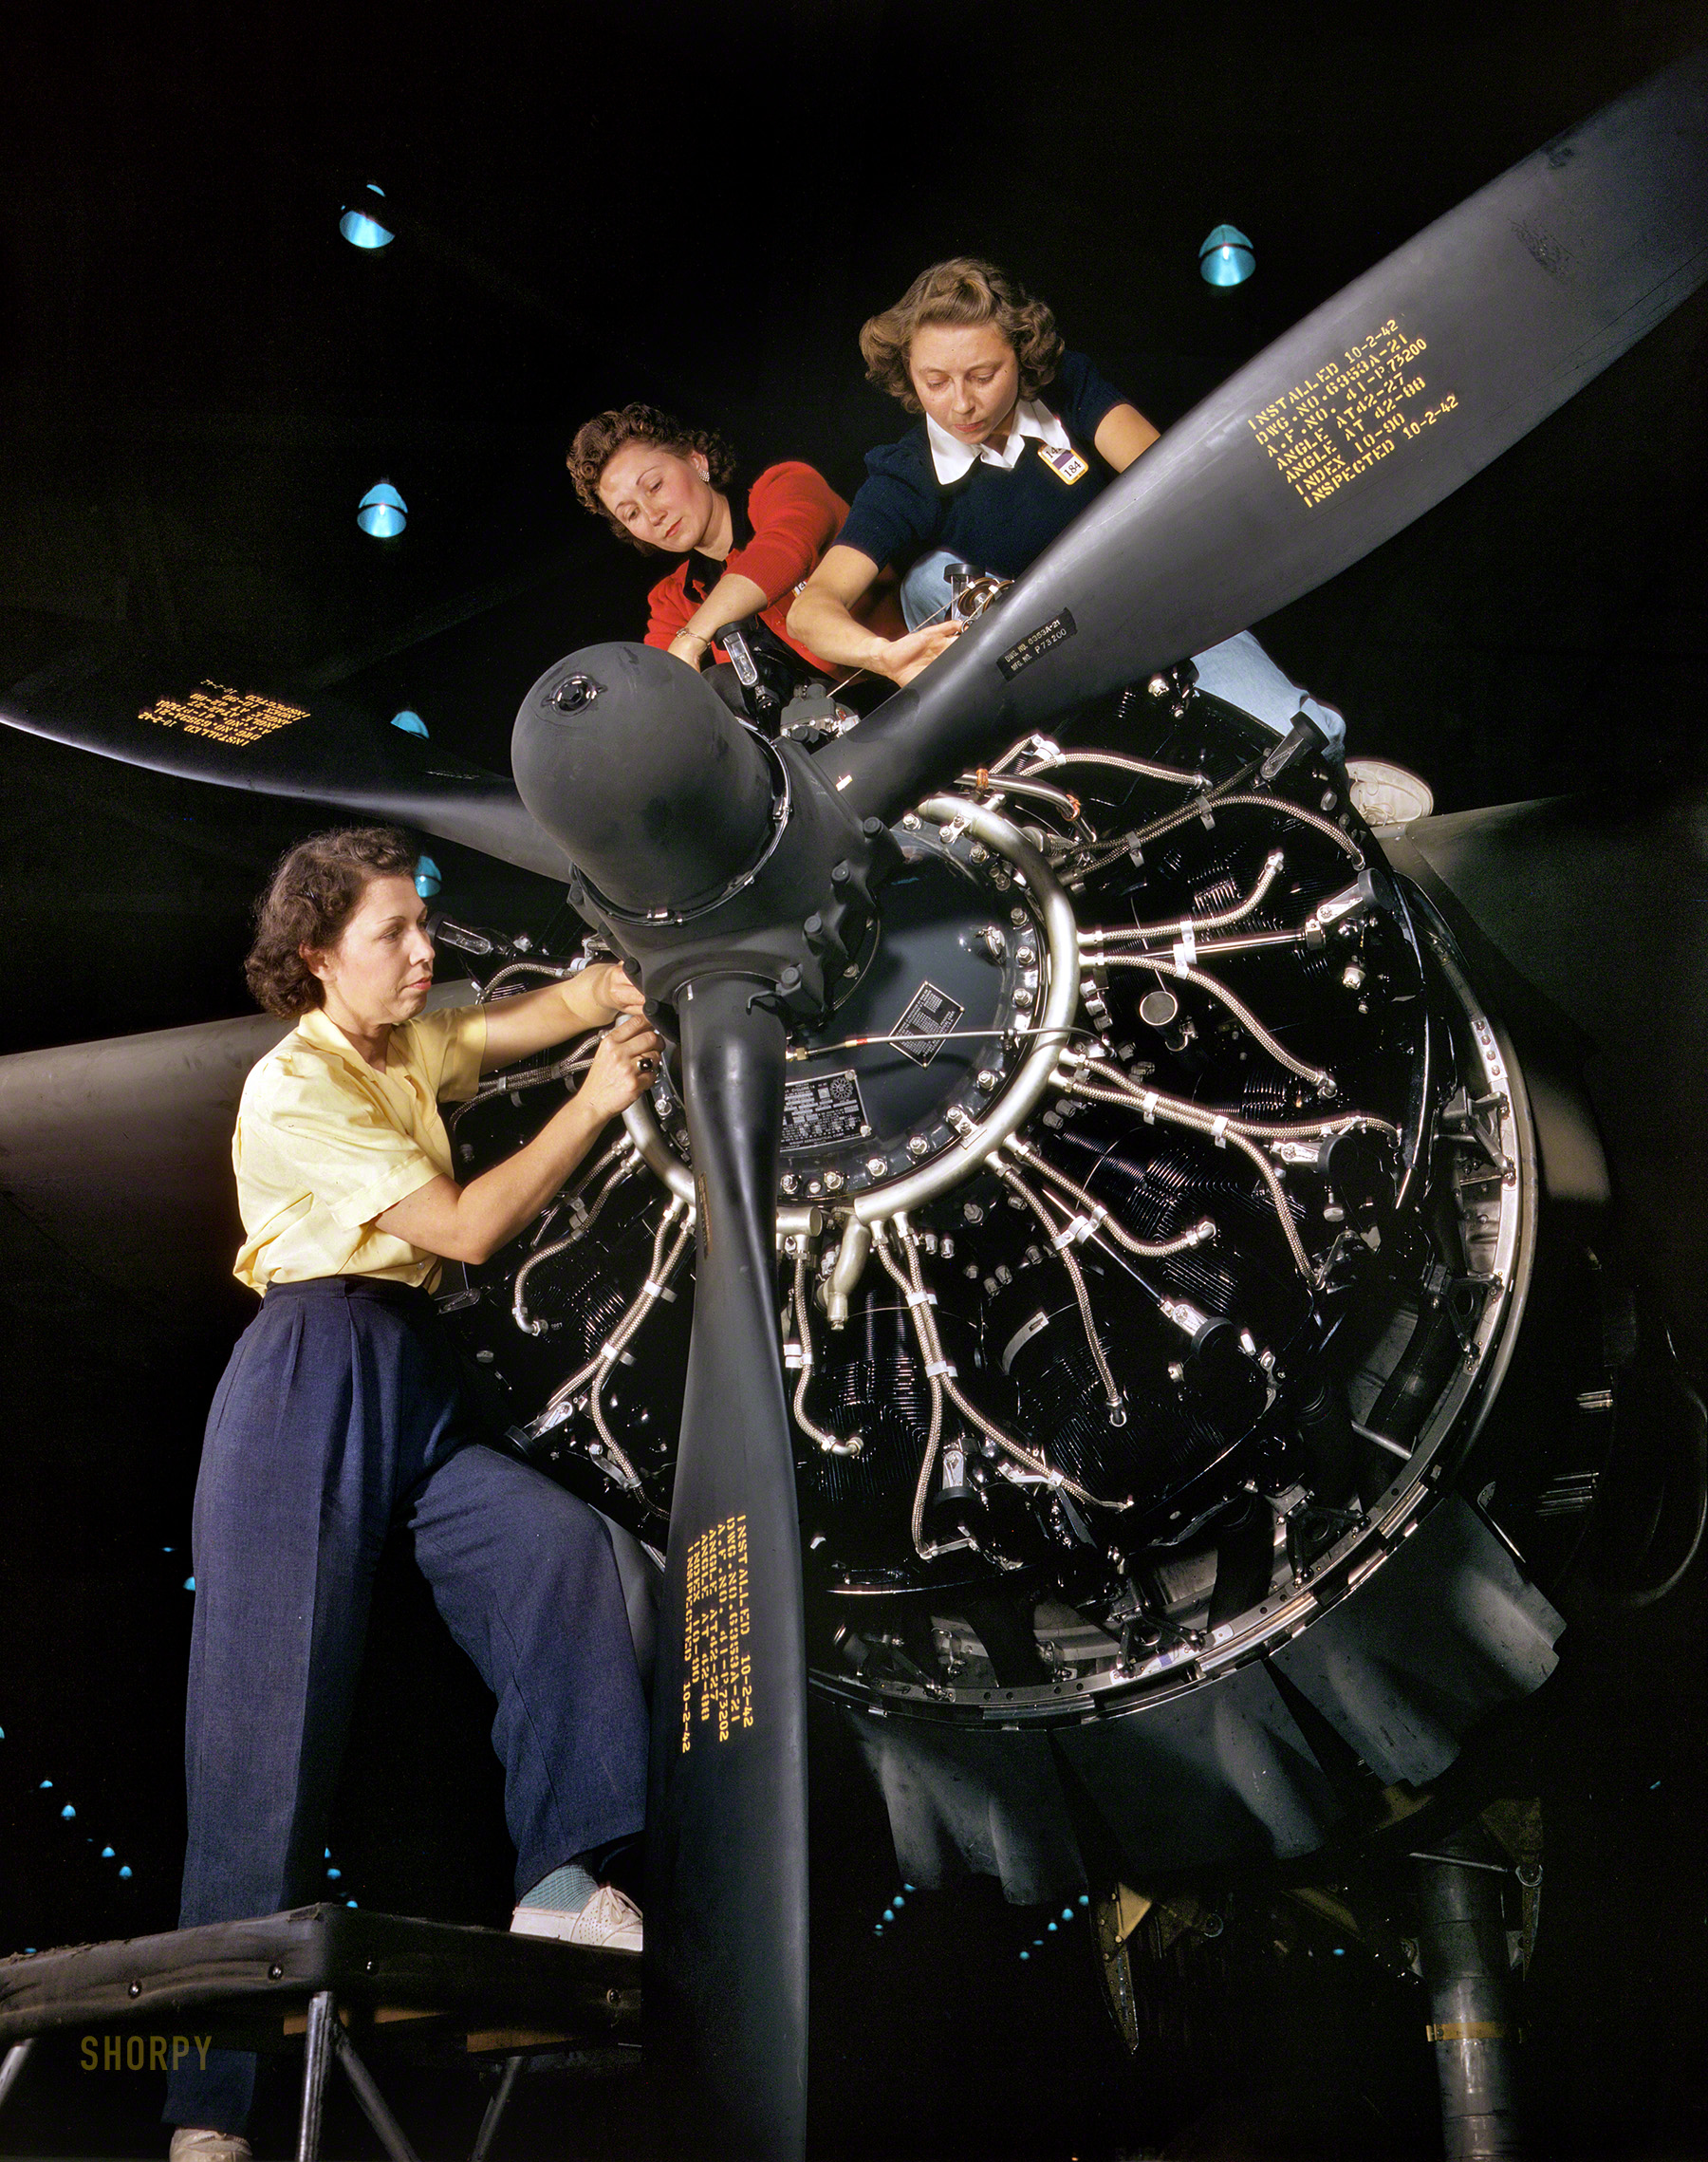 October 1942. "The careful hands of women are trained in precise aircraft engine installation duties at Douglas Aircraft Company, Long Beach, Calif." Kodachrome by Alfred Palmer, Office of War Information. View full size.